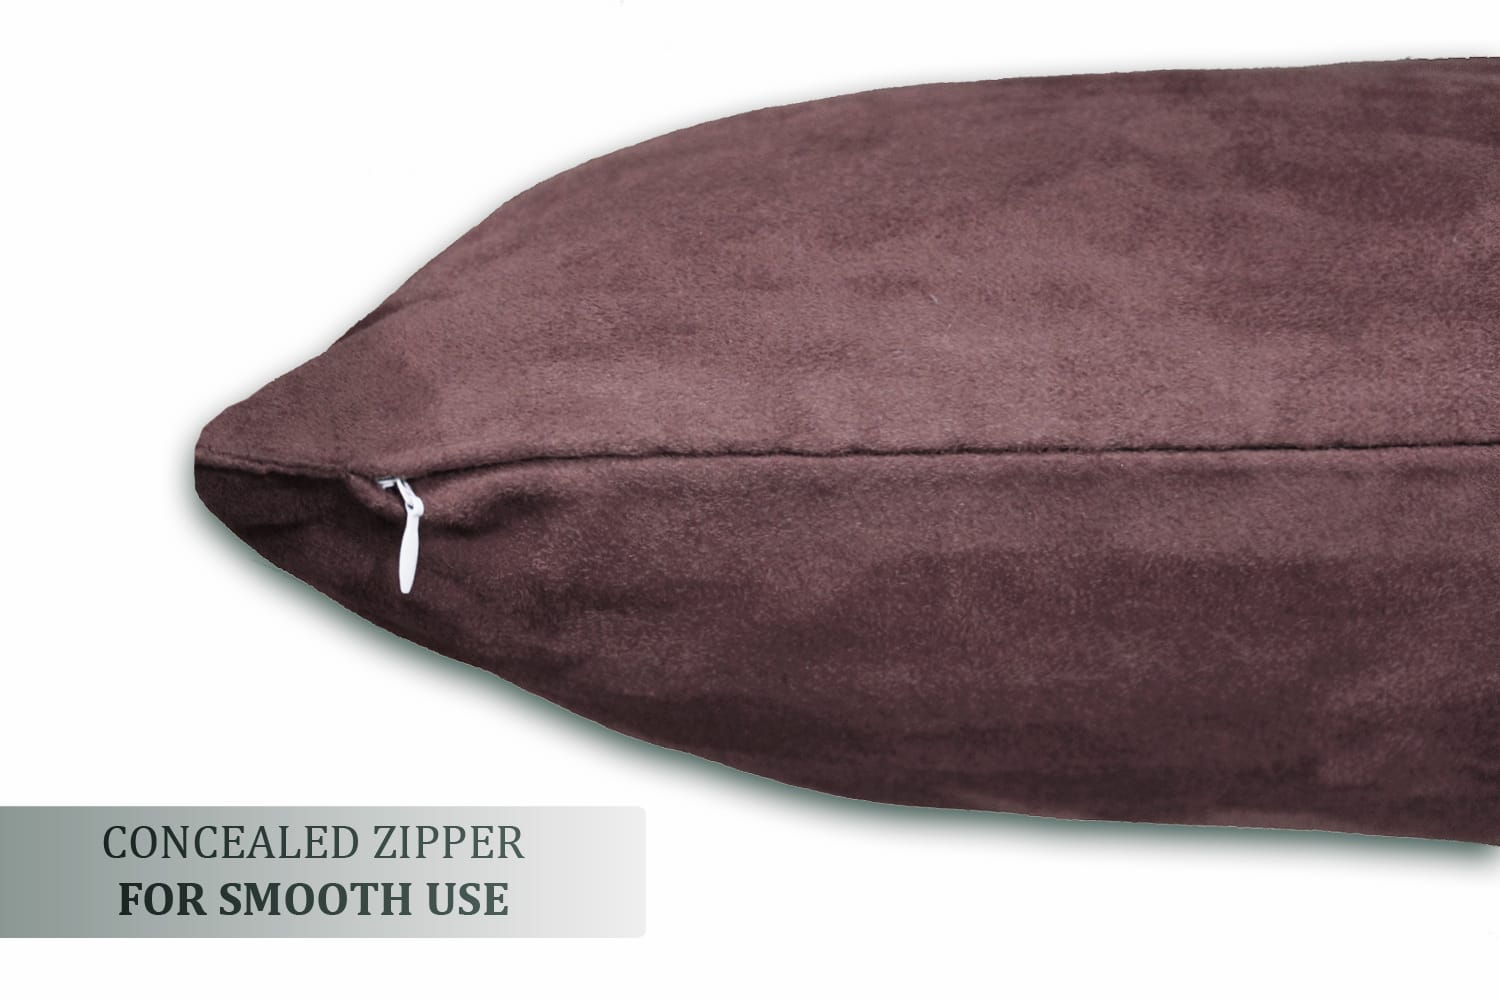 Luxurious Microfiber Suede Velvet Cushion Cover Set in Burgundy online in India